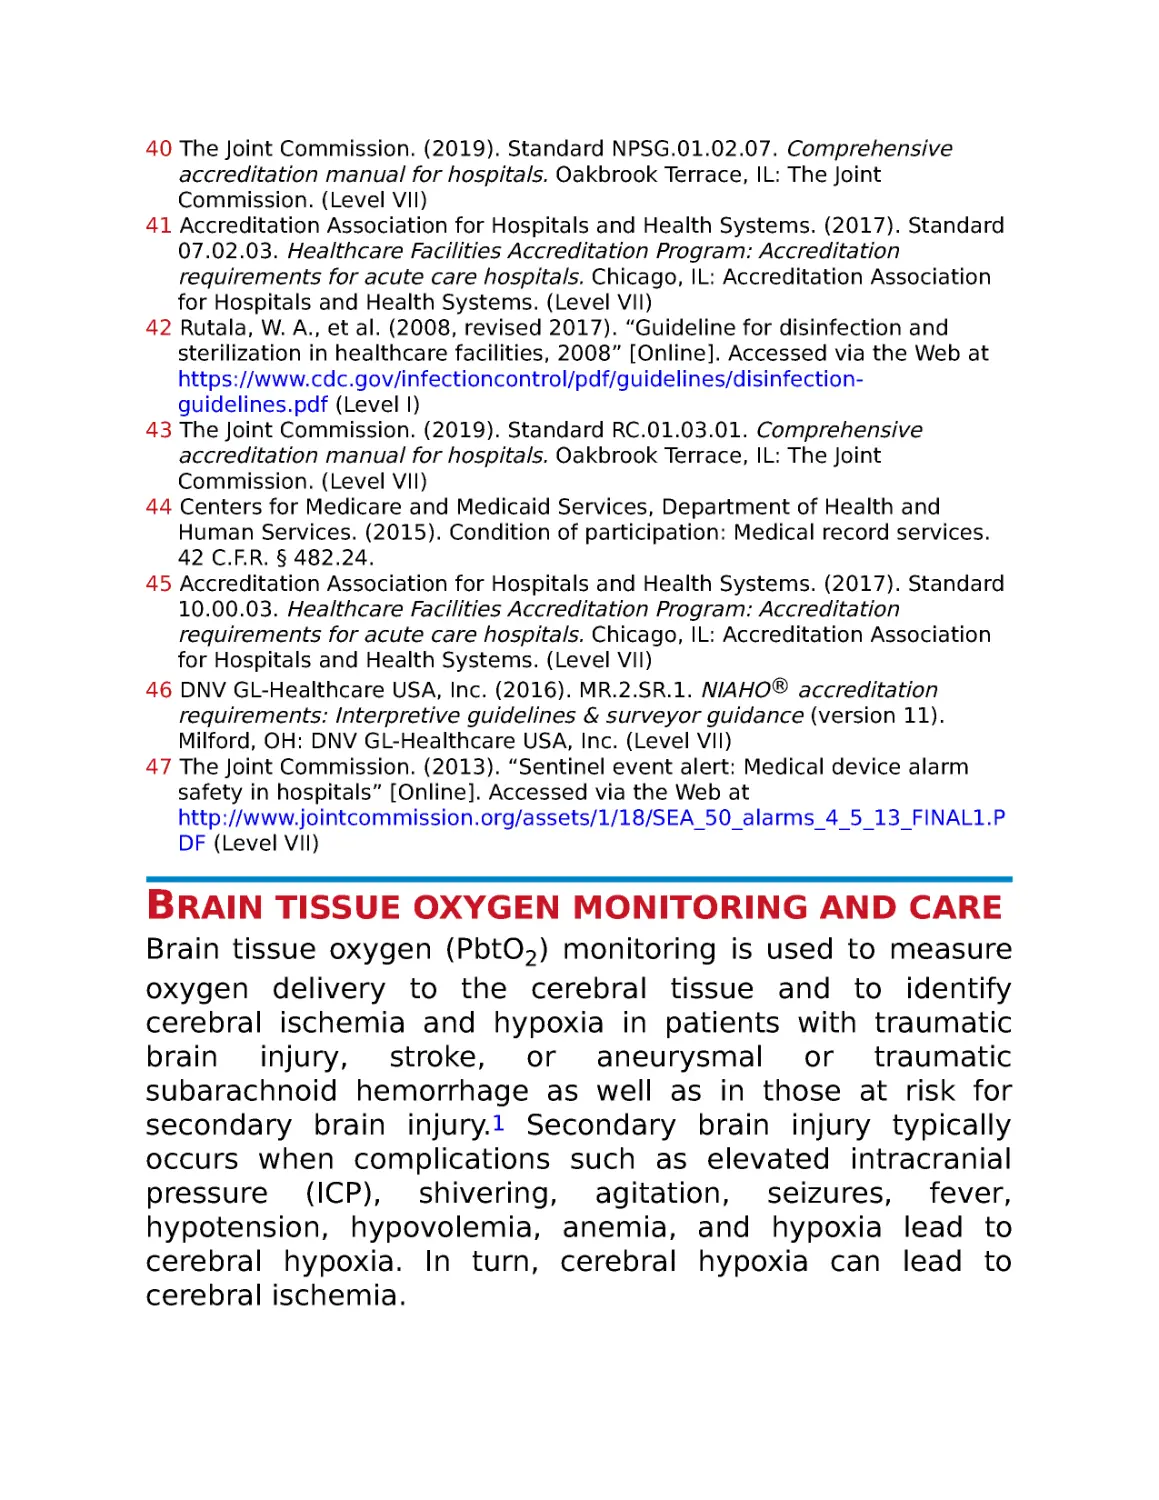 Brain tissue oxygen monitoring and care